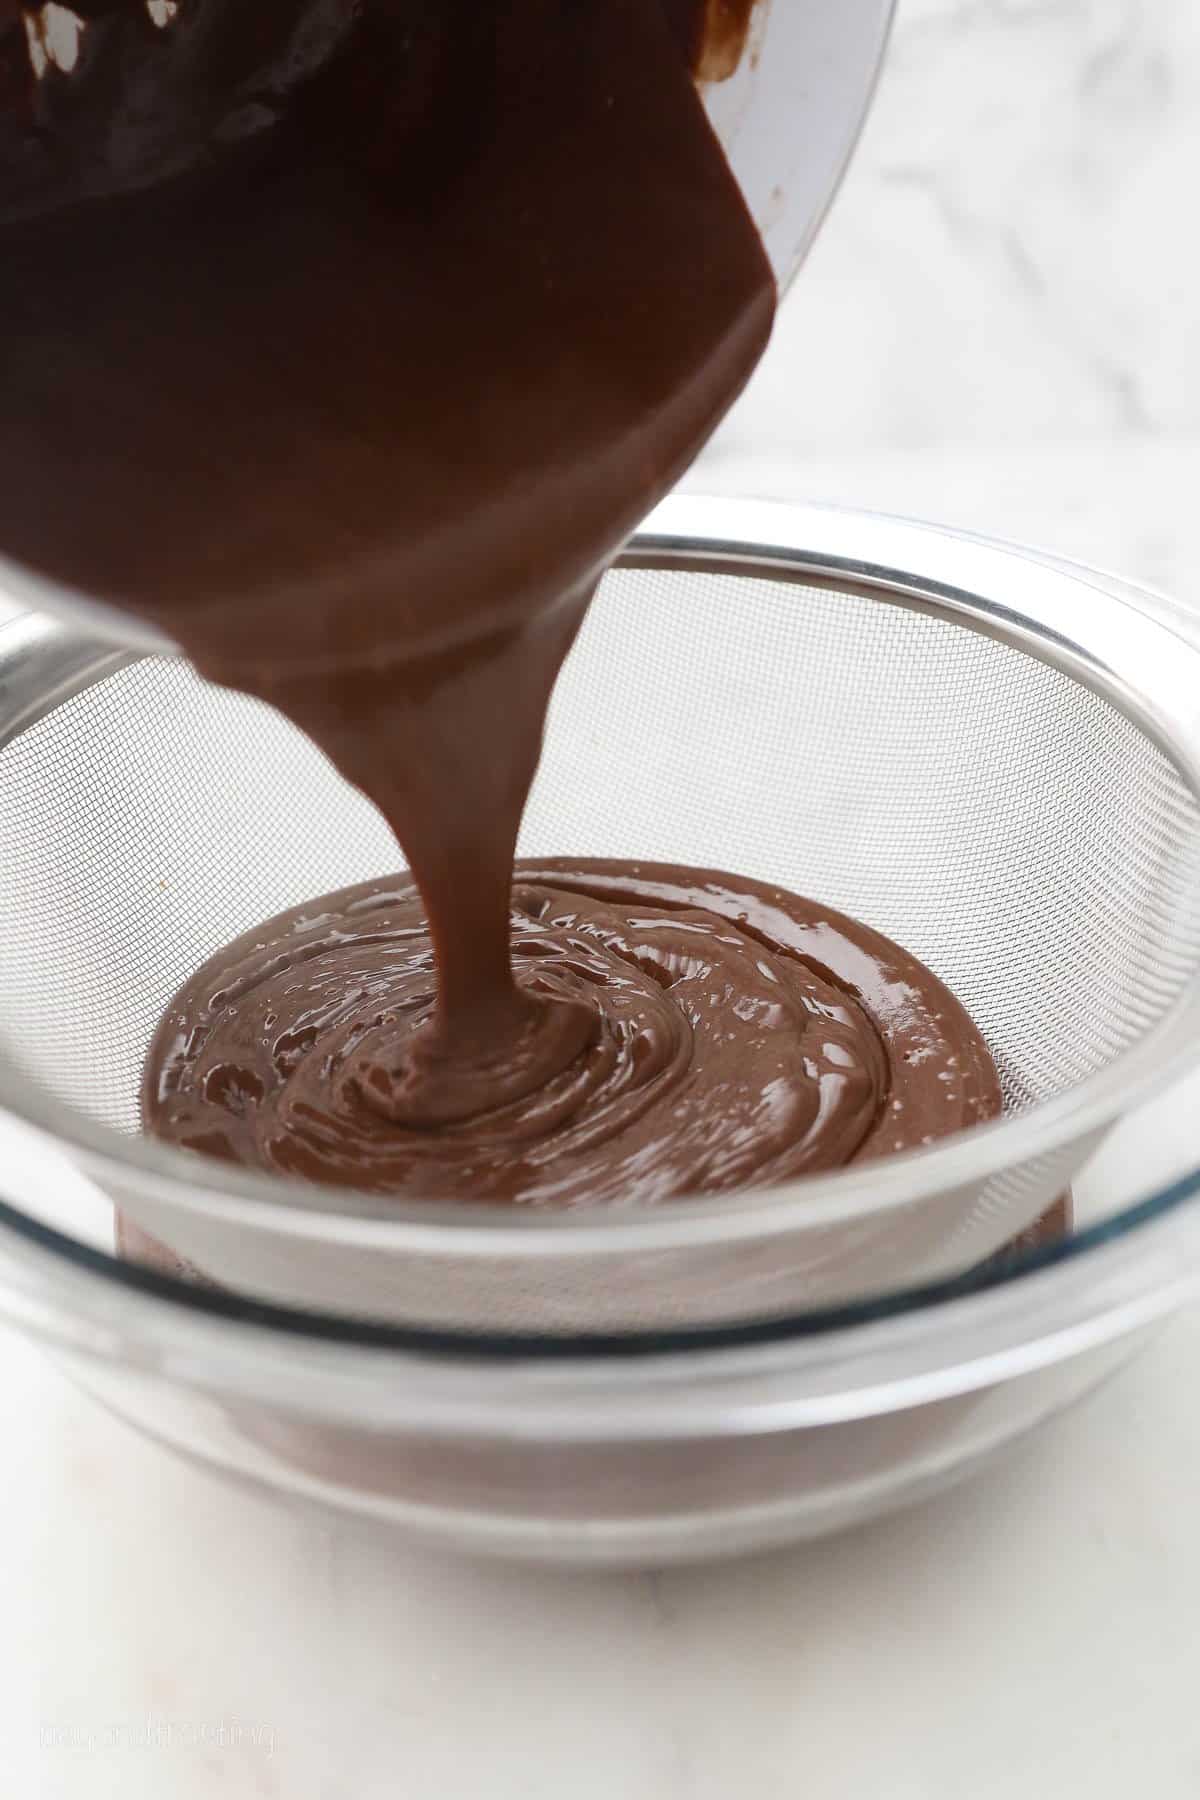 Melted chocolate being poured through a sieve